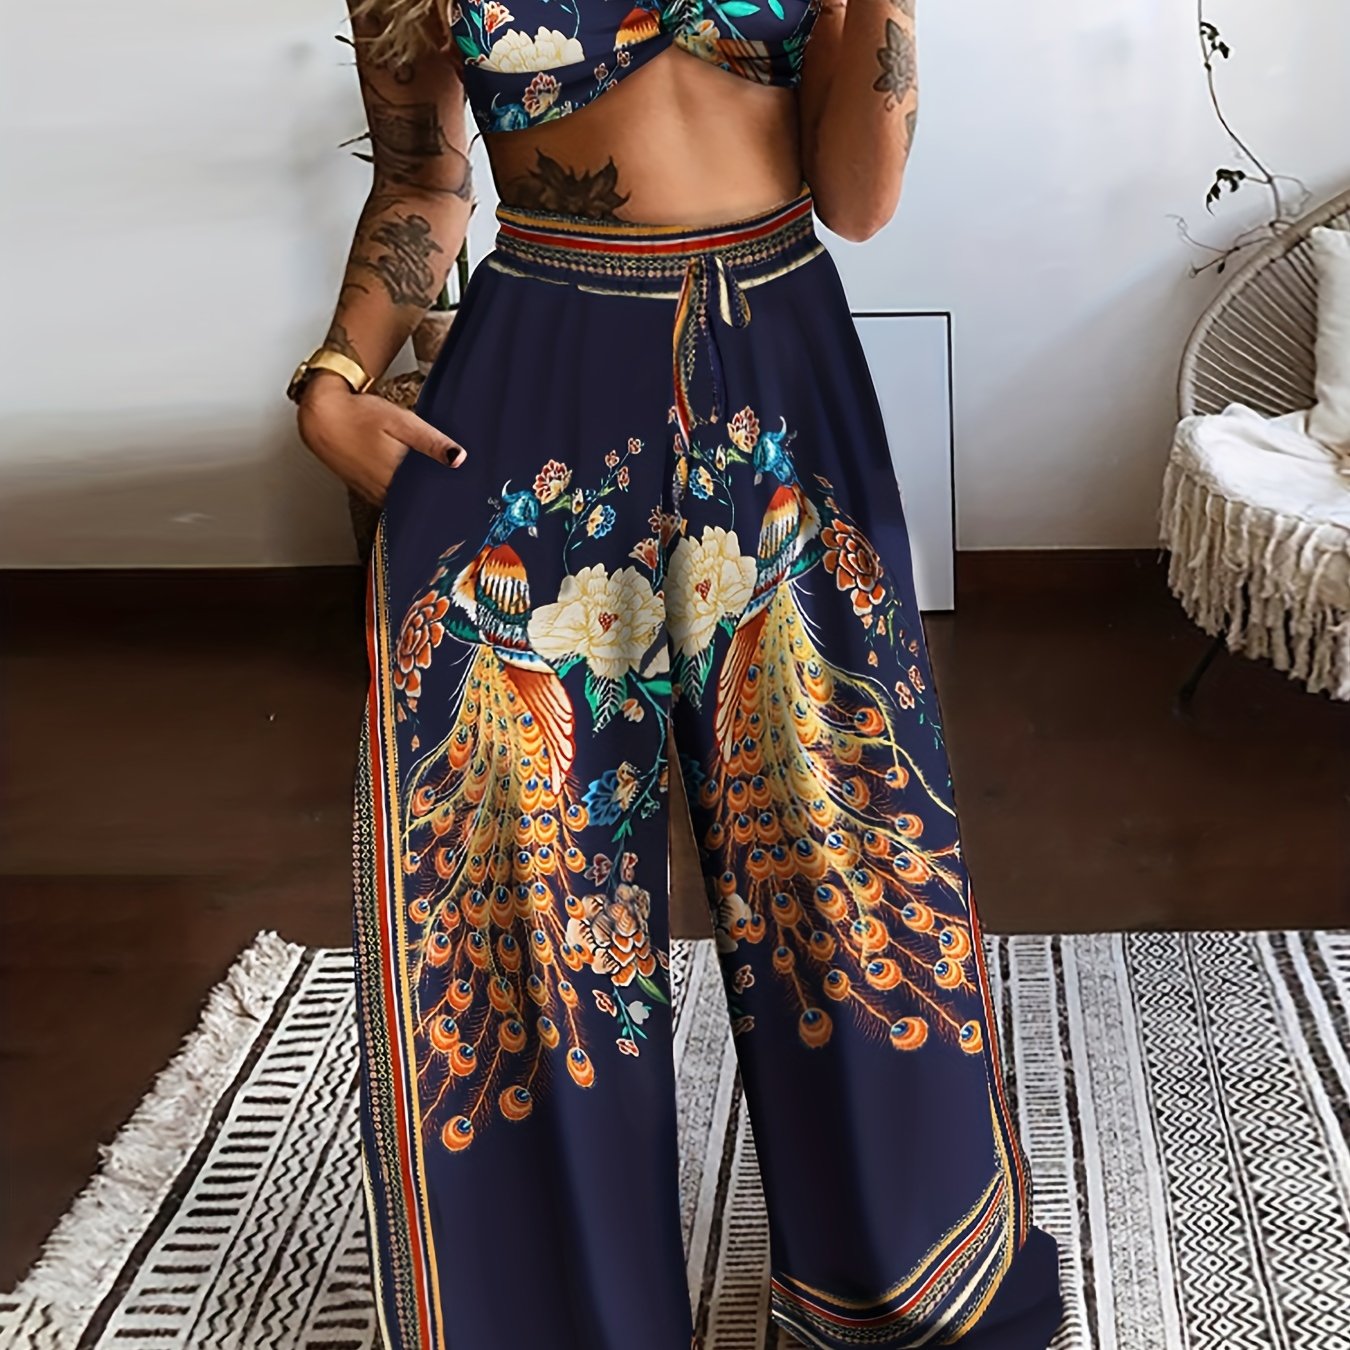 Girlfairy - Boho Butterfly Print Two-piece Set, Crop Cami Top & Wide Leg Pants Outfits, Women's Clothing